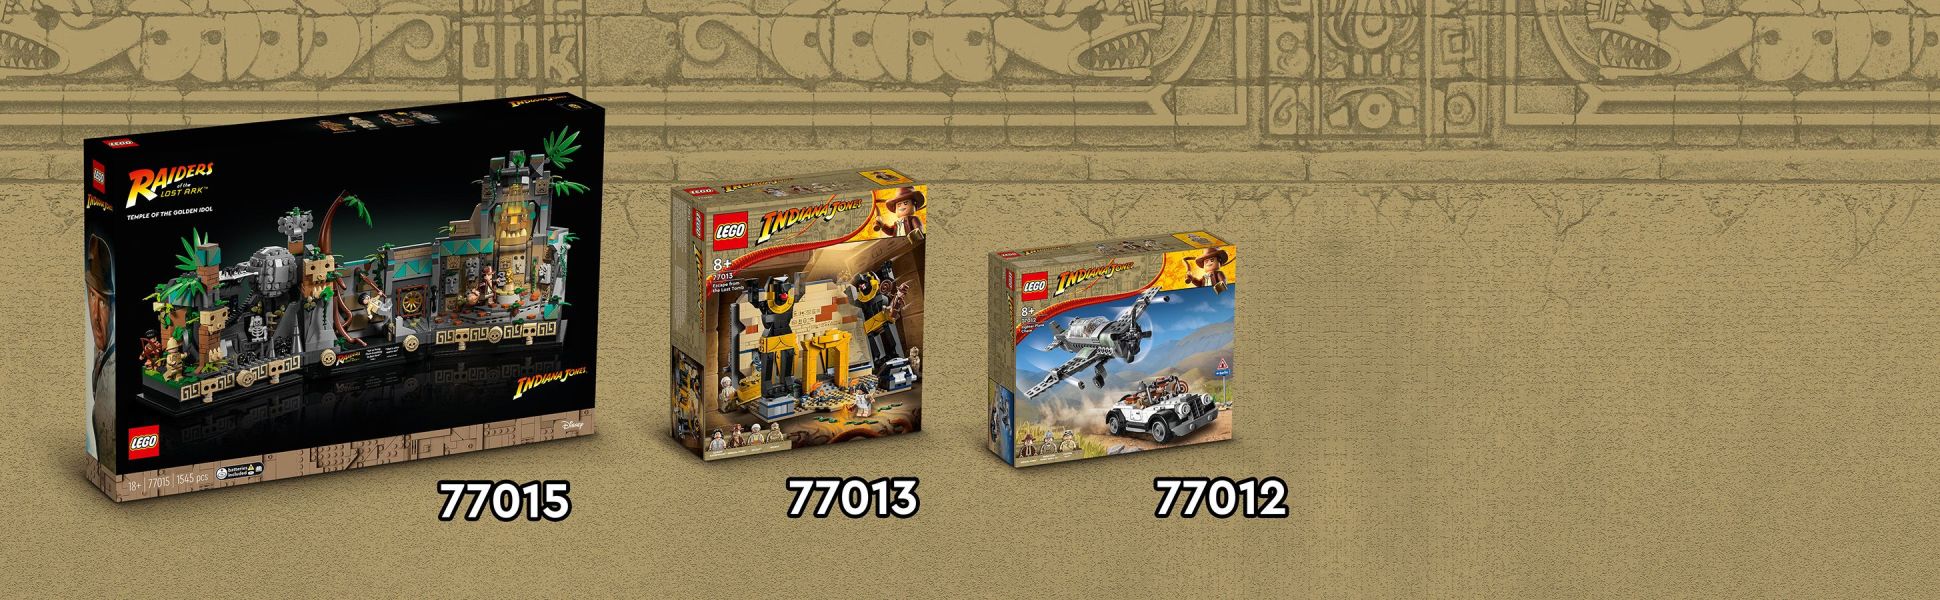 Lego Indiana Jones And The Last Crusade Fighter Plane Chase 77012 : Target